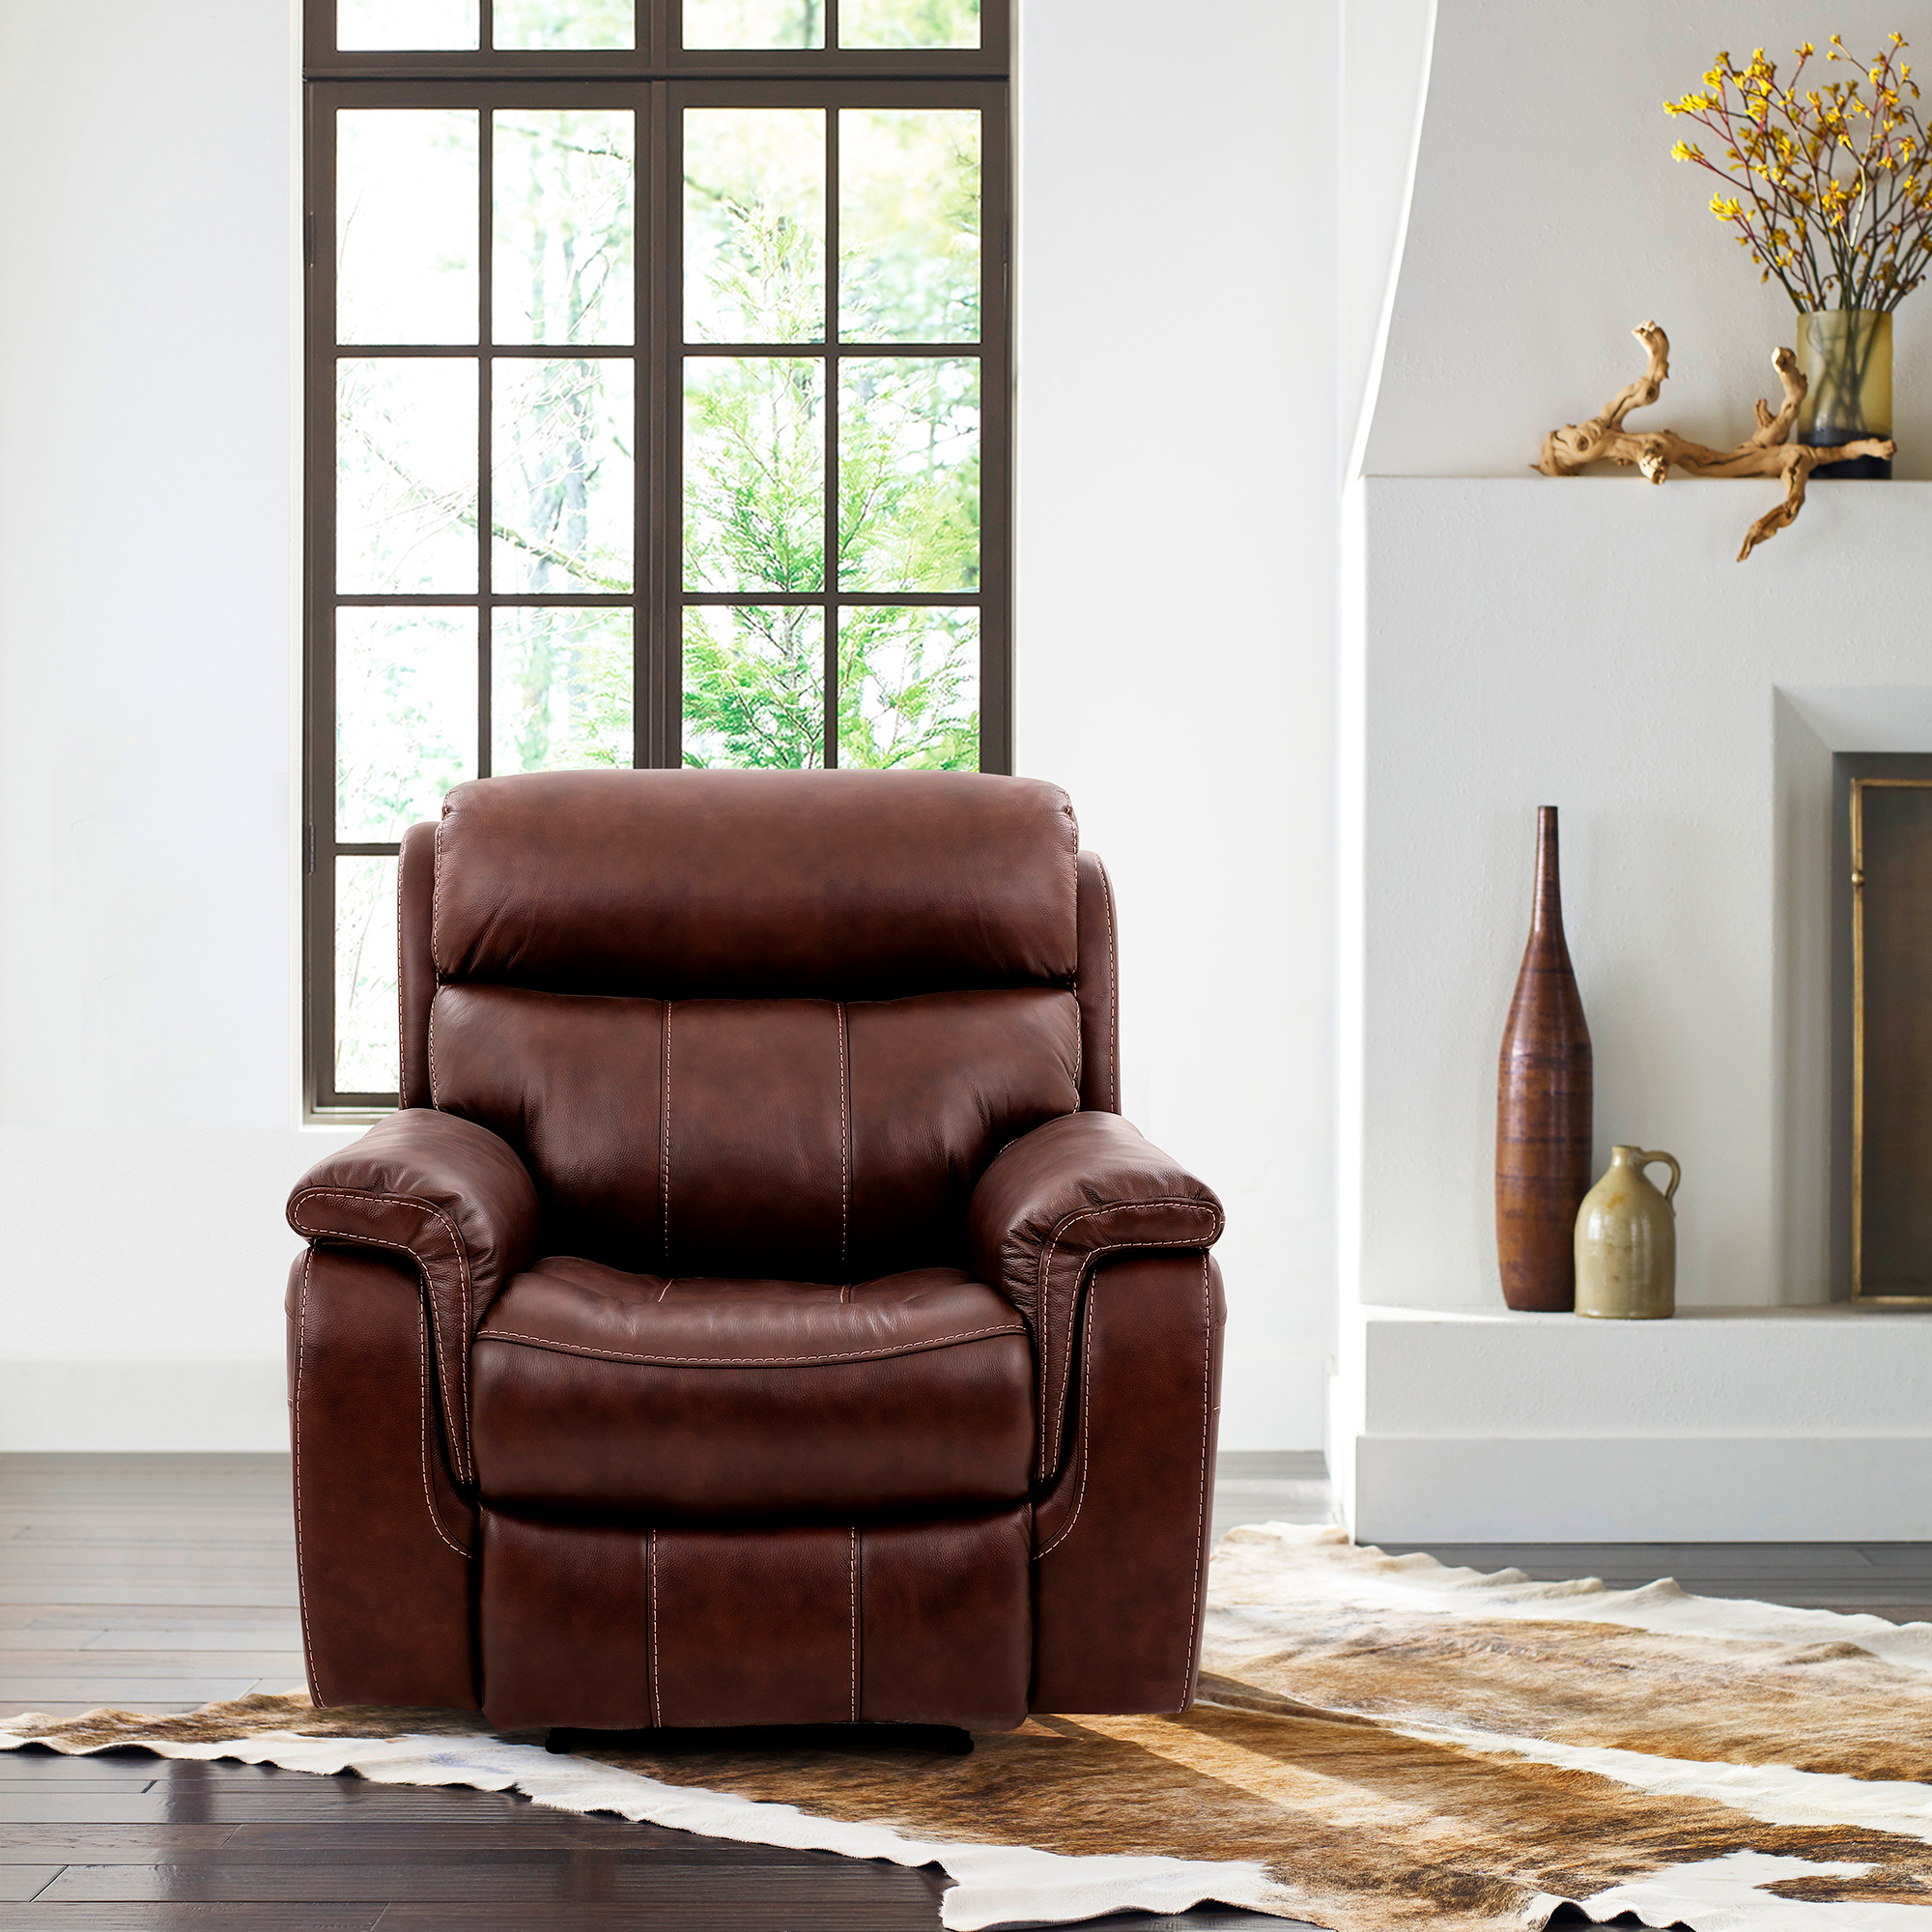 https://www.homethreads.com/files/armen-living/lcmn1br-montague-dual-power-headrest-and-lumbar-support-recliner-chair-in-genuine-brown-leather-ls.jpg